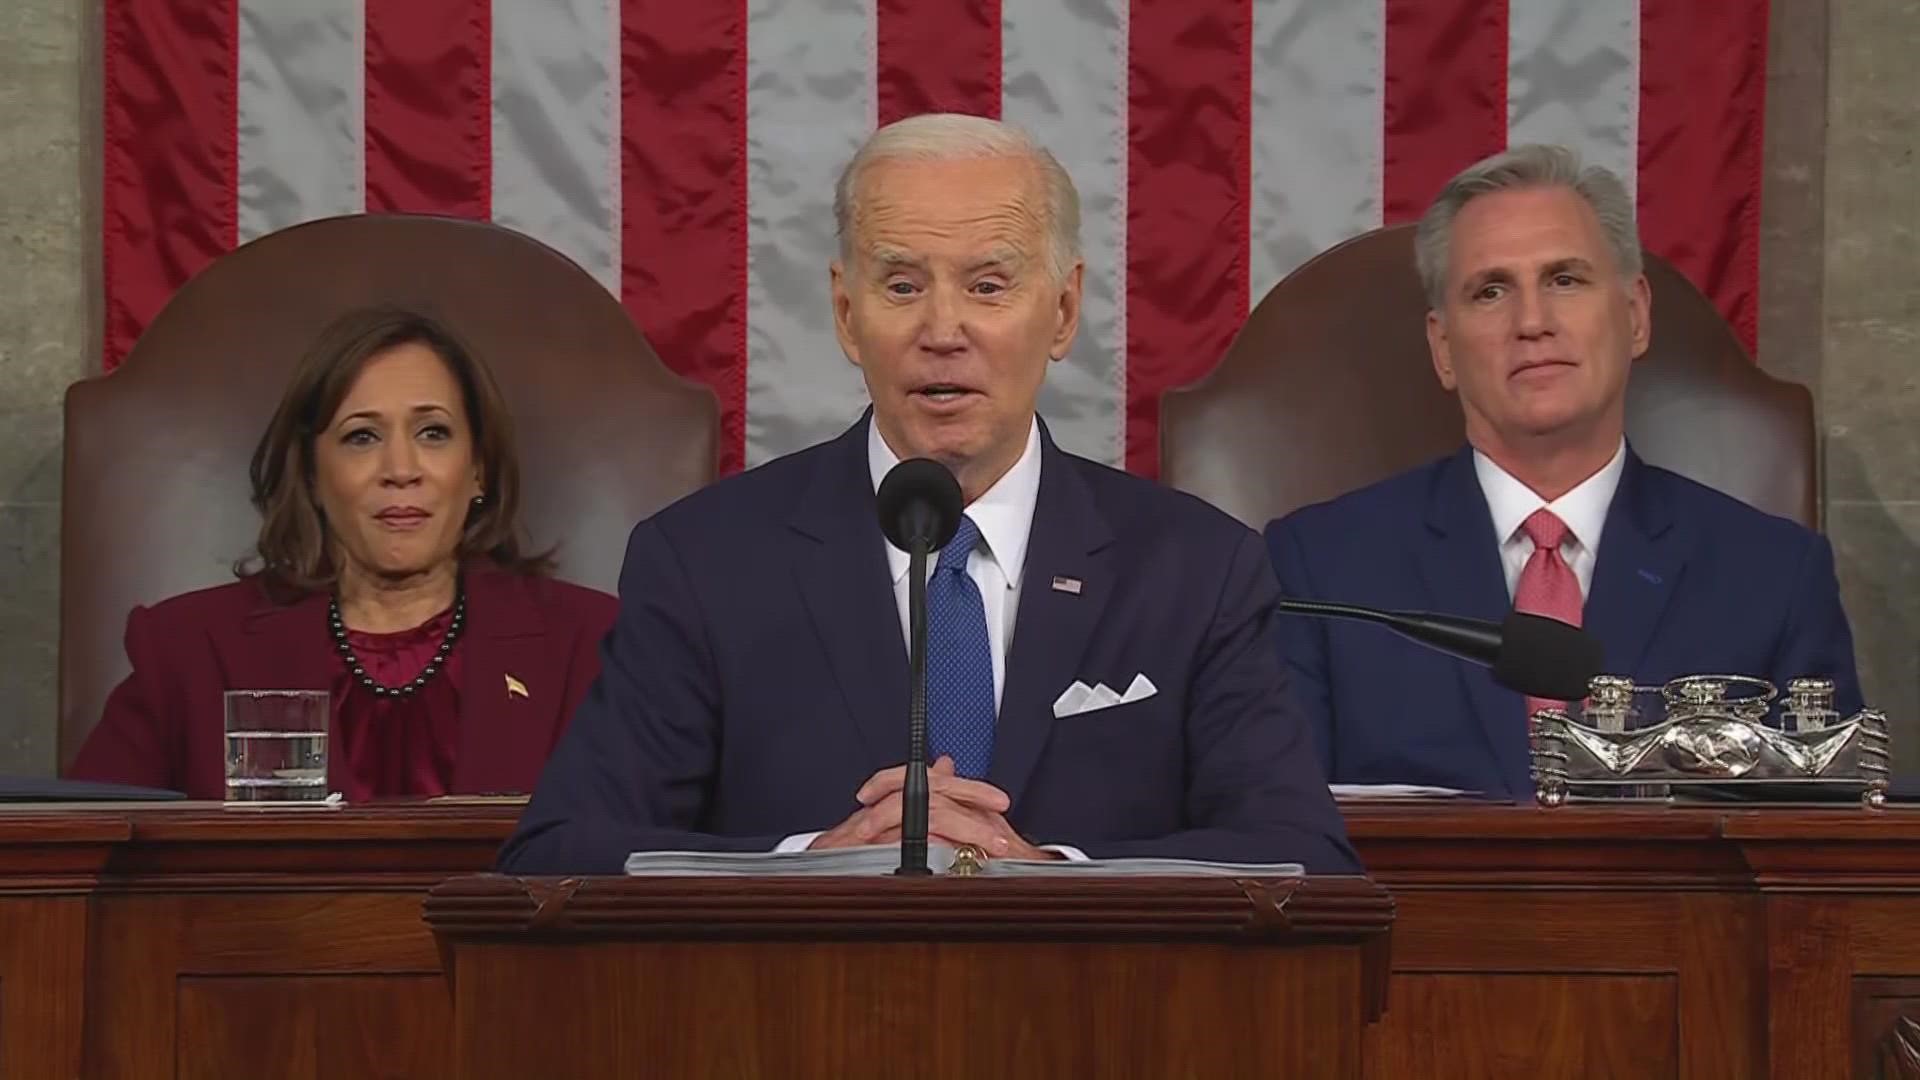 President Biden drew shouts and groans from Republicans after accusing "some" in the GOP of threatening to end Medicare and Social Security.